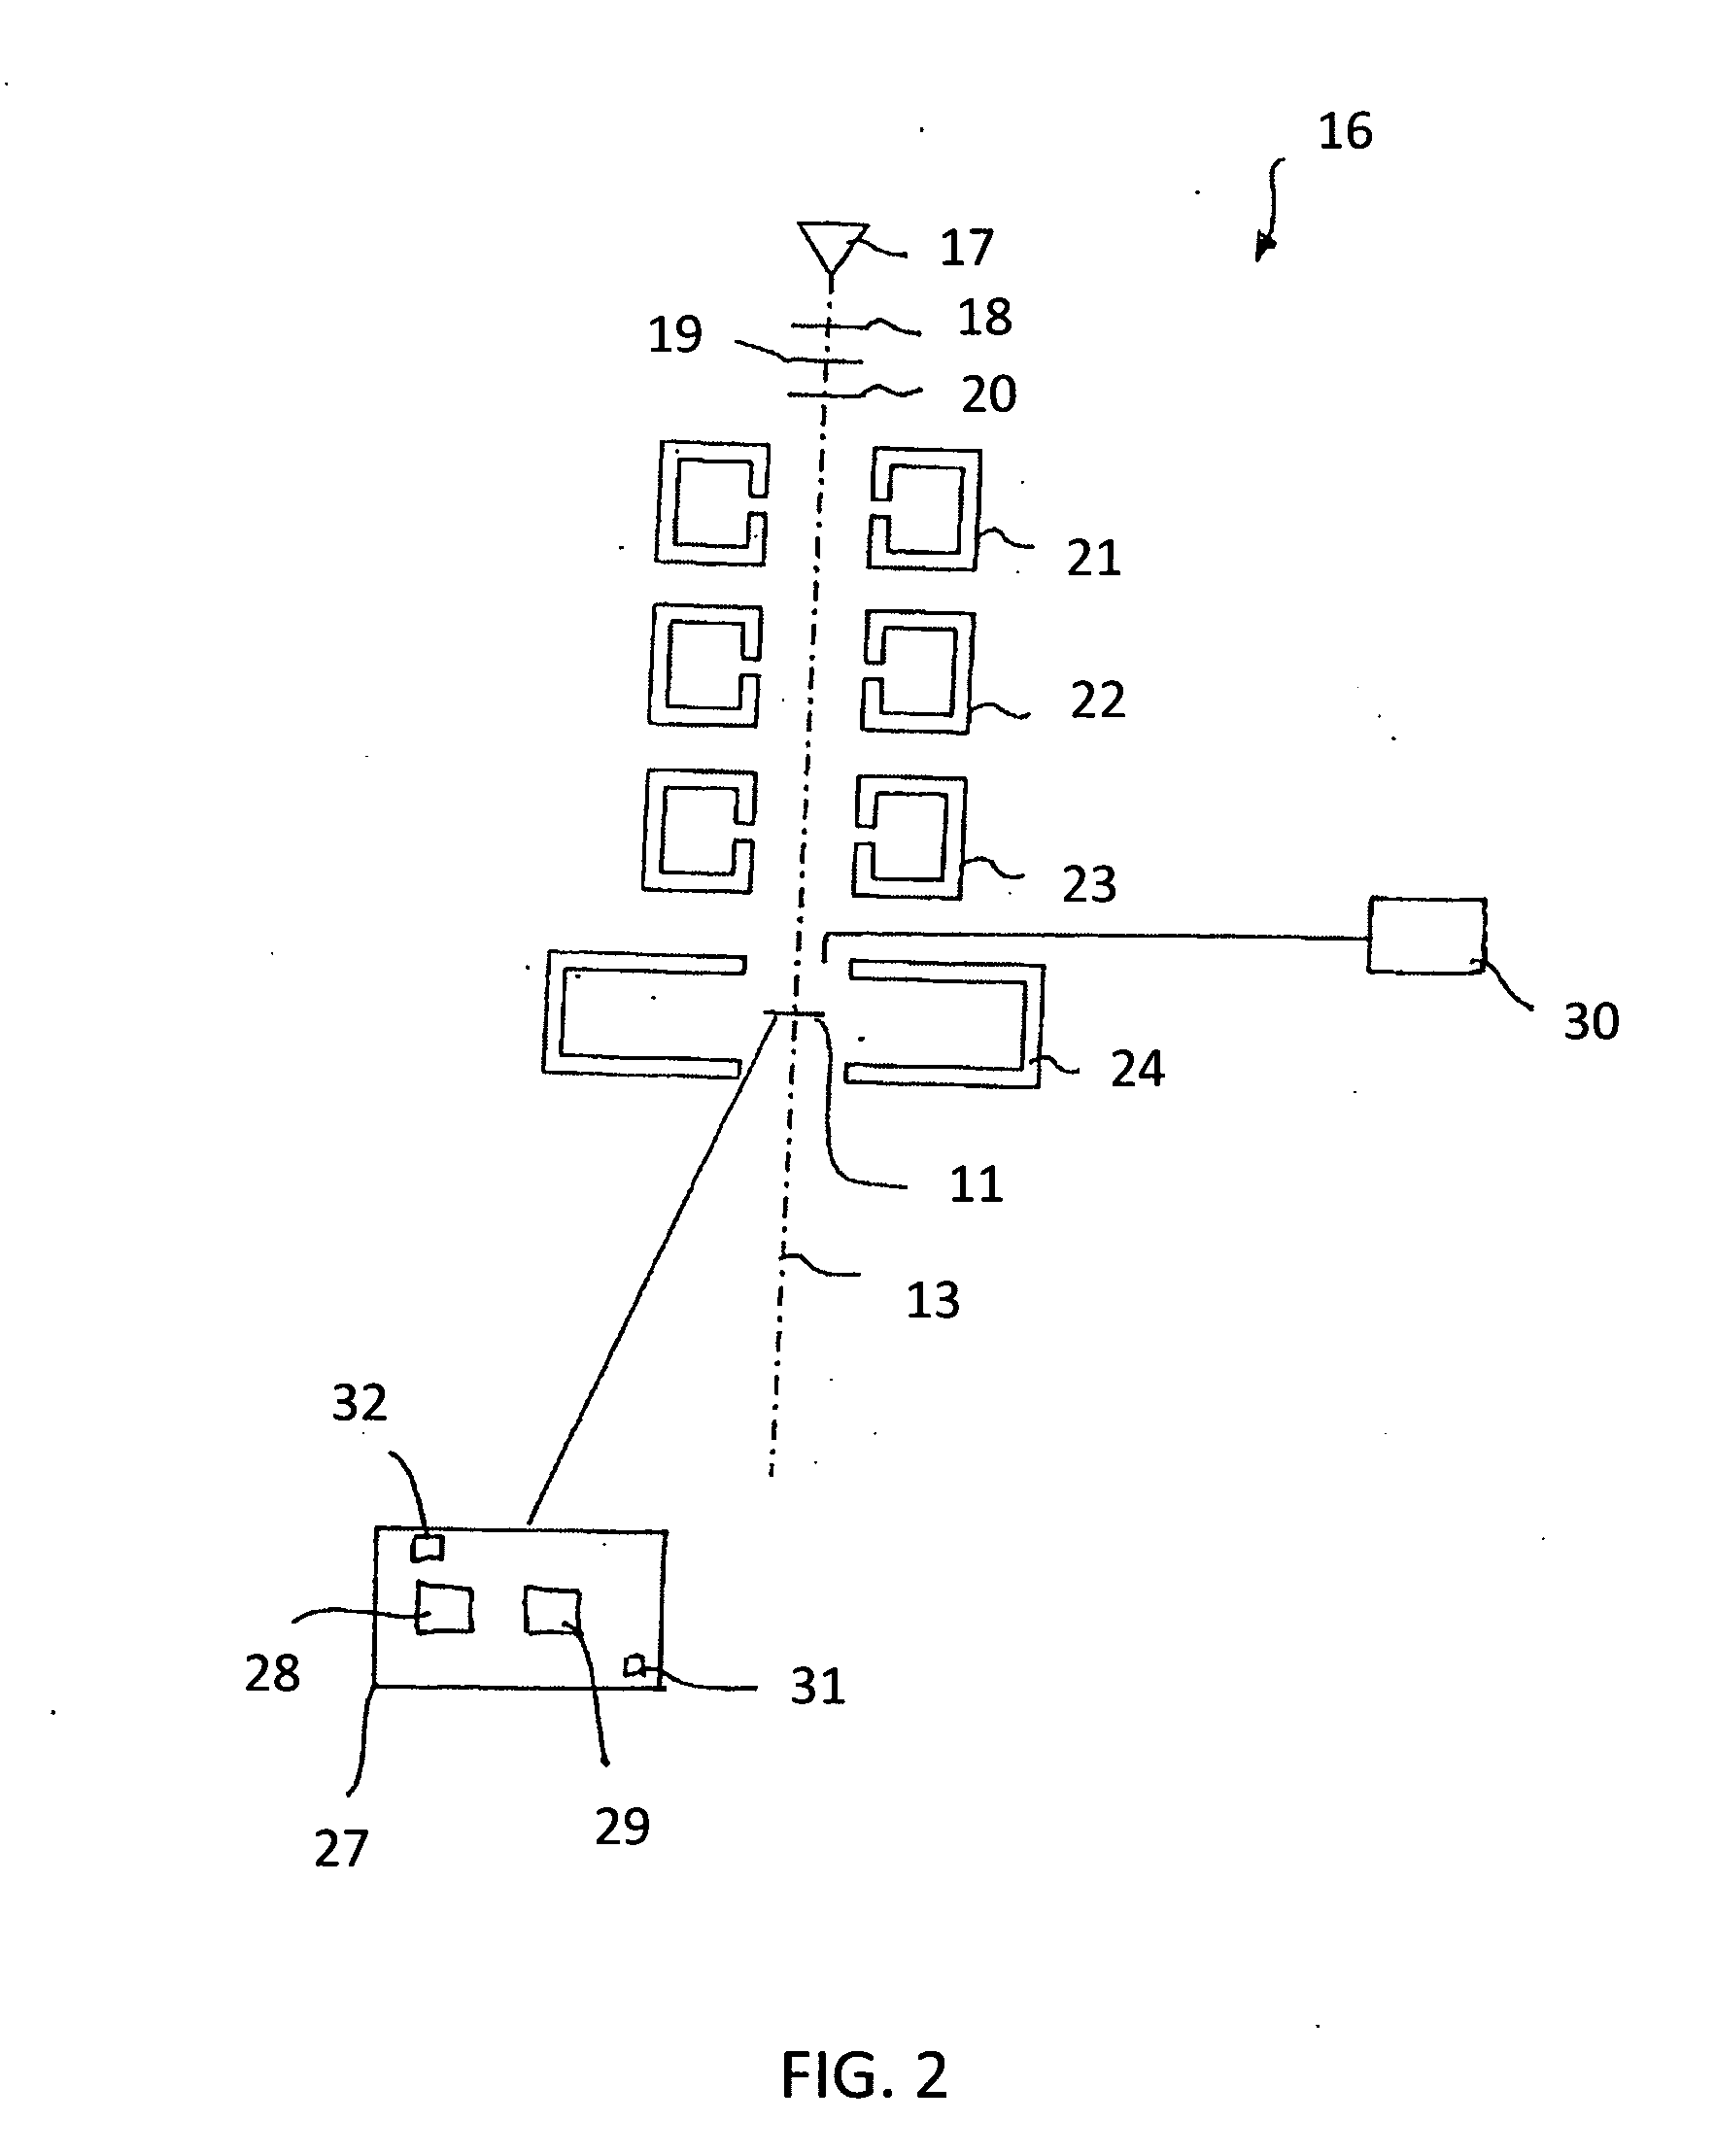 Method and device for controlling and monitoring a position of a holding element